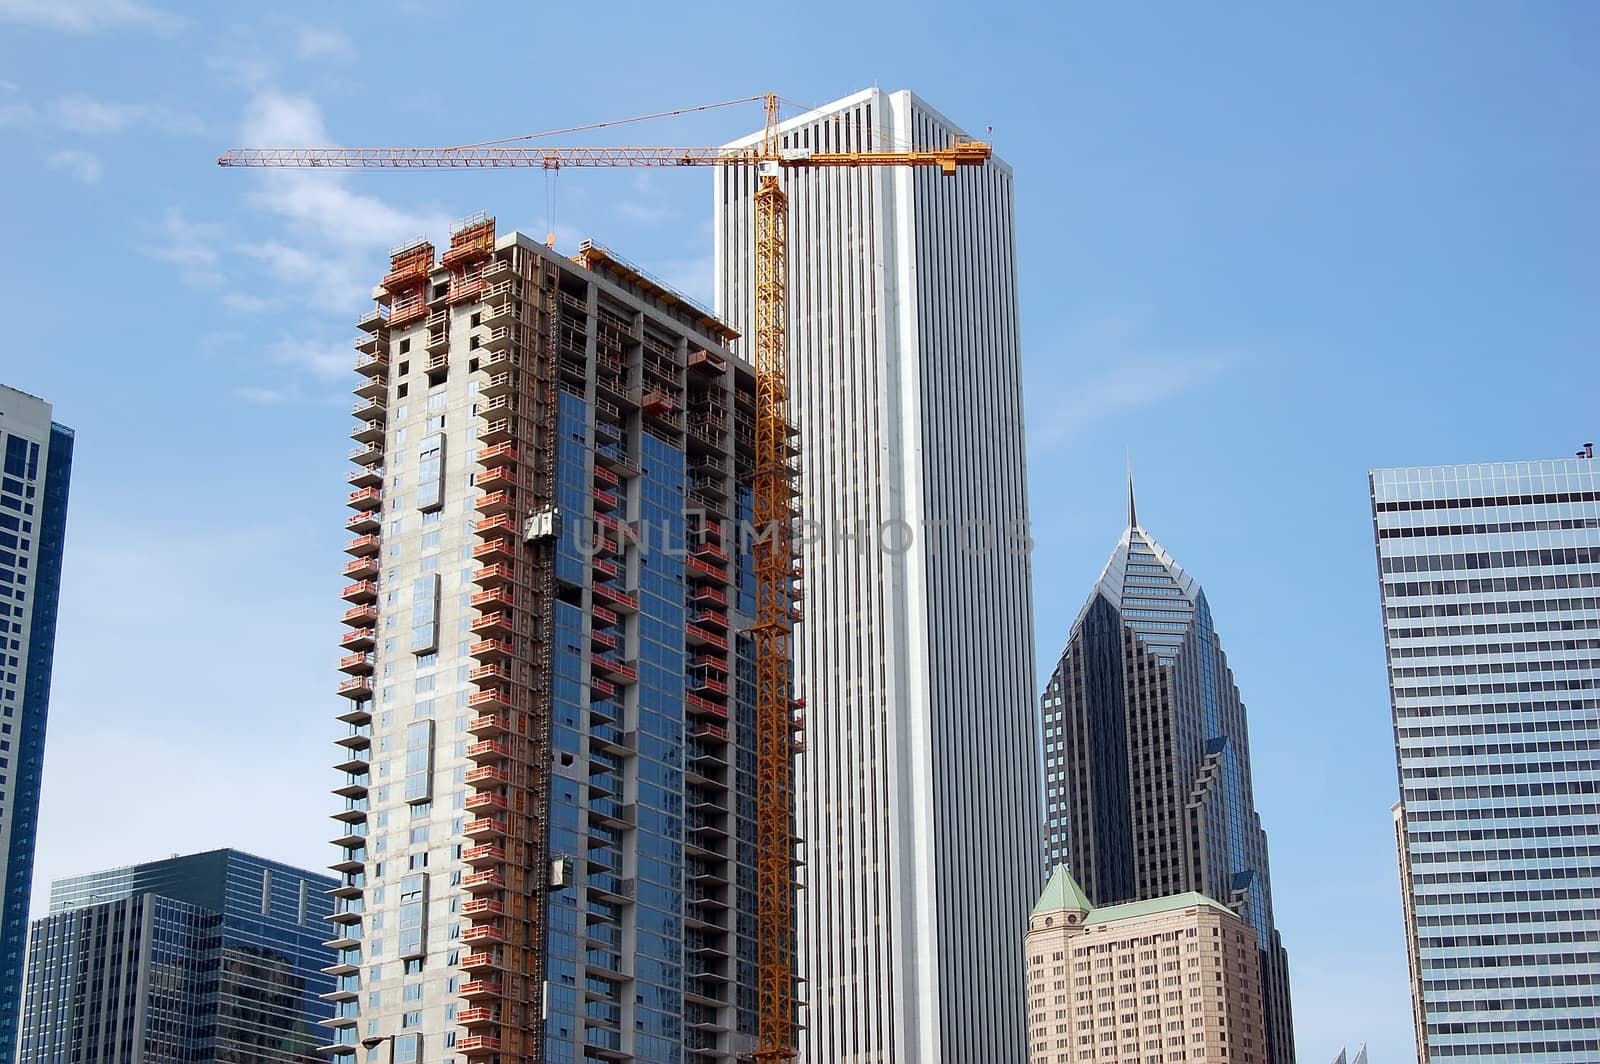 Picture of a skyscraper under construction in Chicago